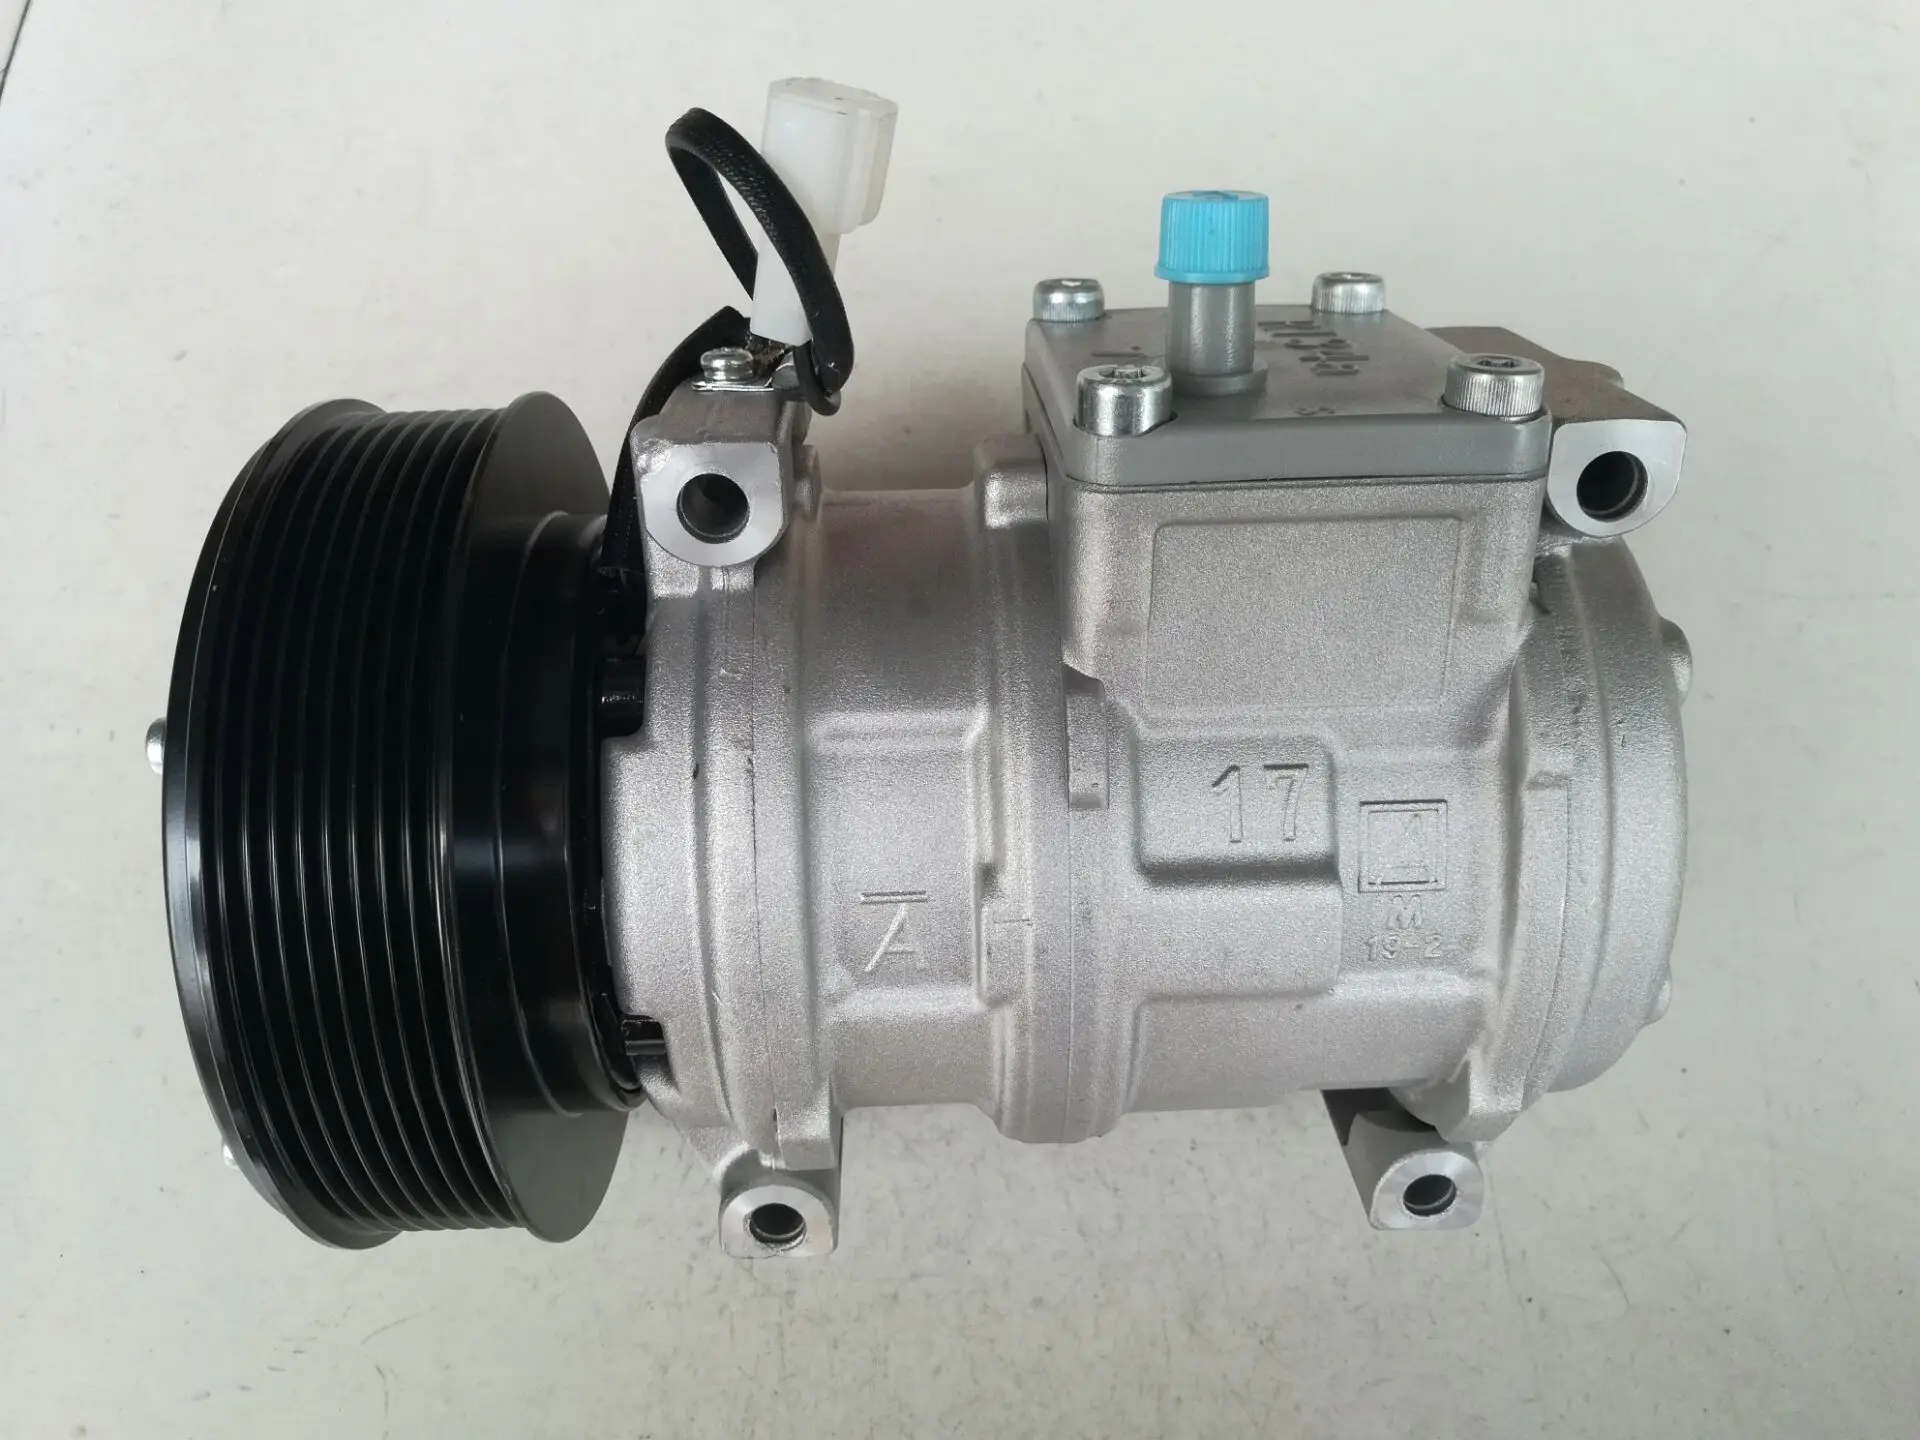 

ac compressor OE RE69716 SE501462 fit for John Deere Tractor 10PA17C TY6764 TY24304 AN221429 447170-9490 4472004930 CO 22030C